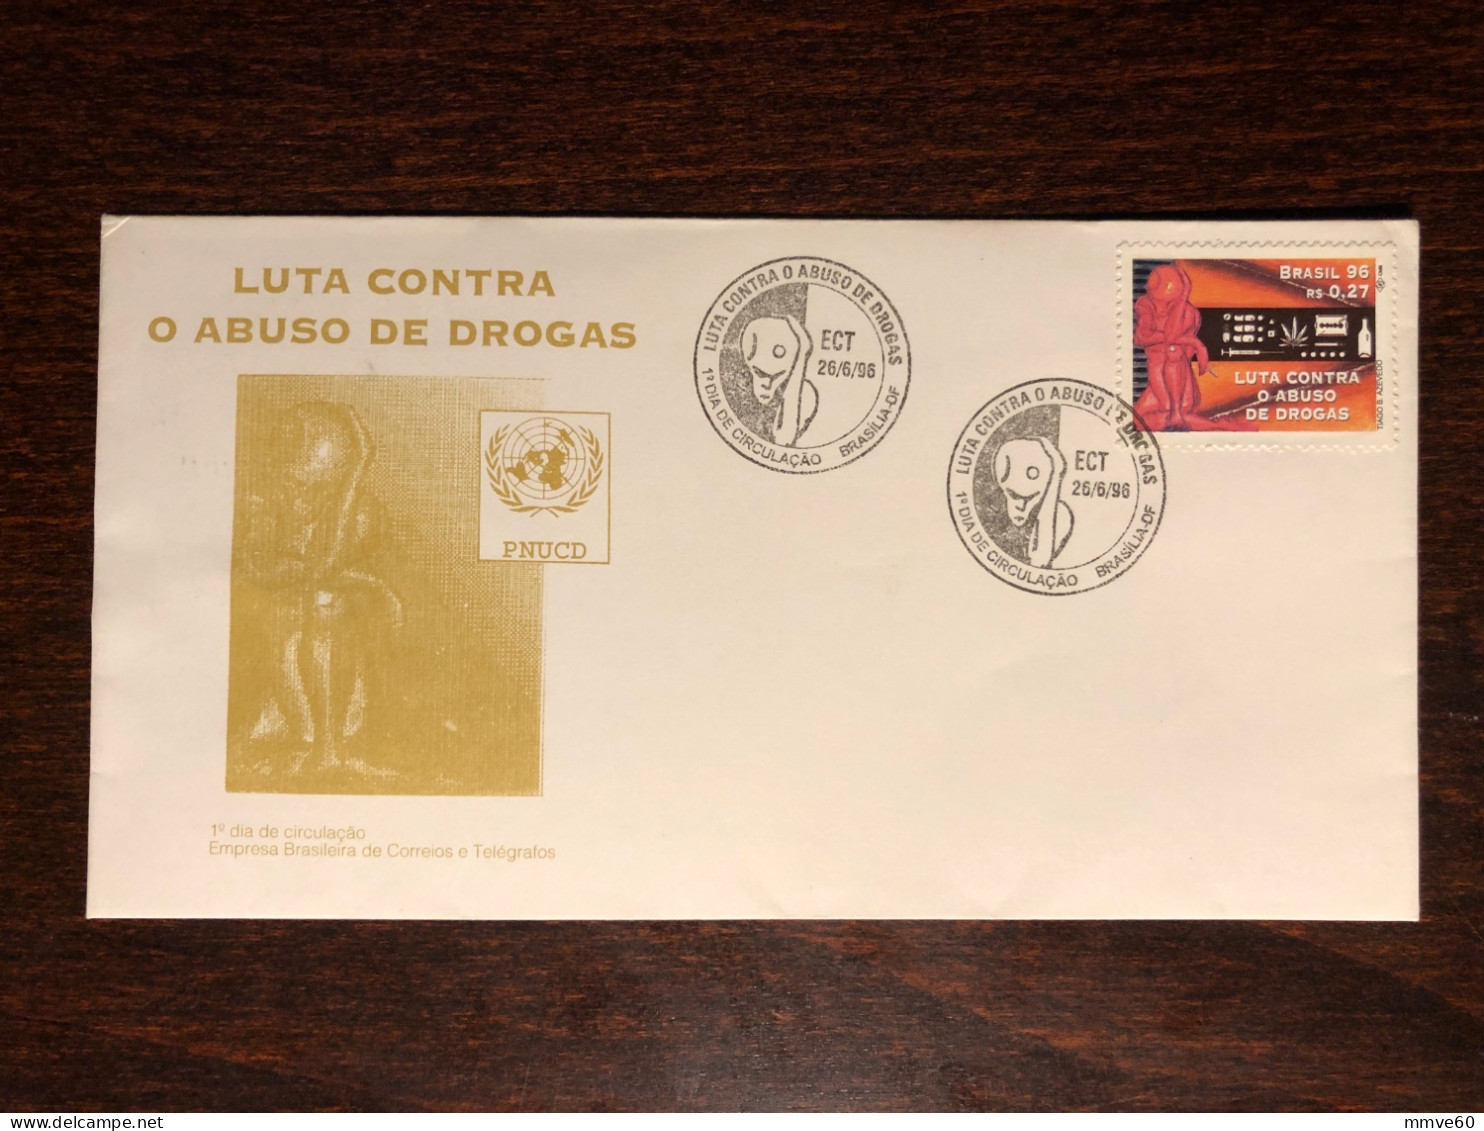 BRAZIL FDC COVER 1996 YEAR NARCOTICS DRUGS HEALTH MEDICINE STAMPS - Covers & Documents